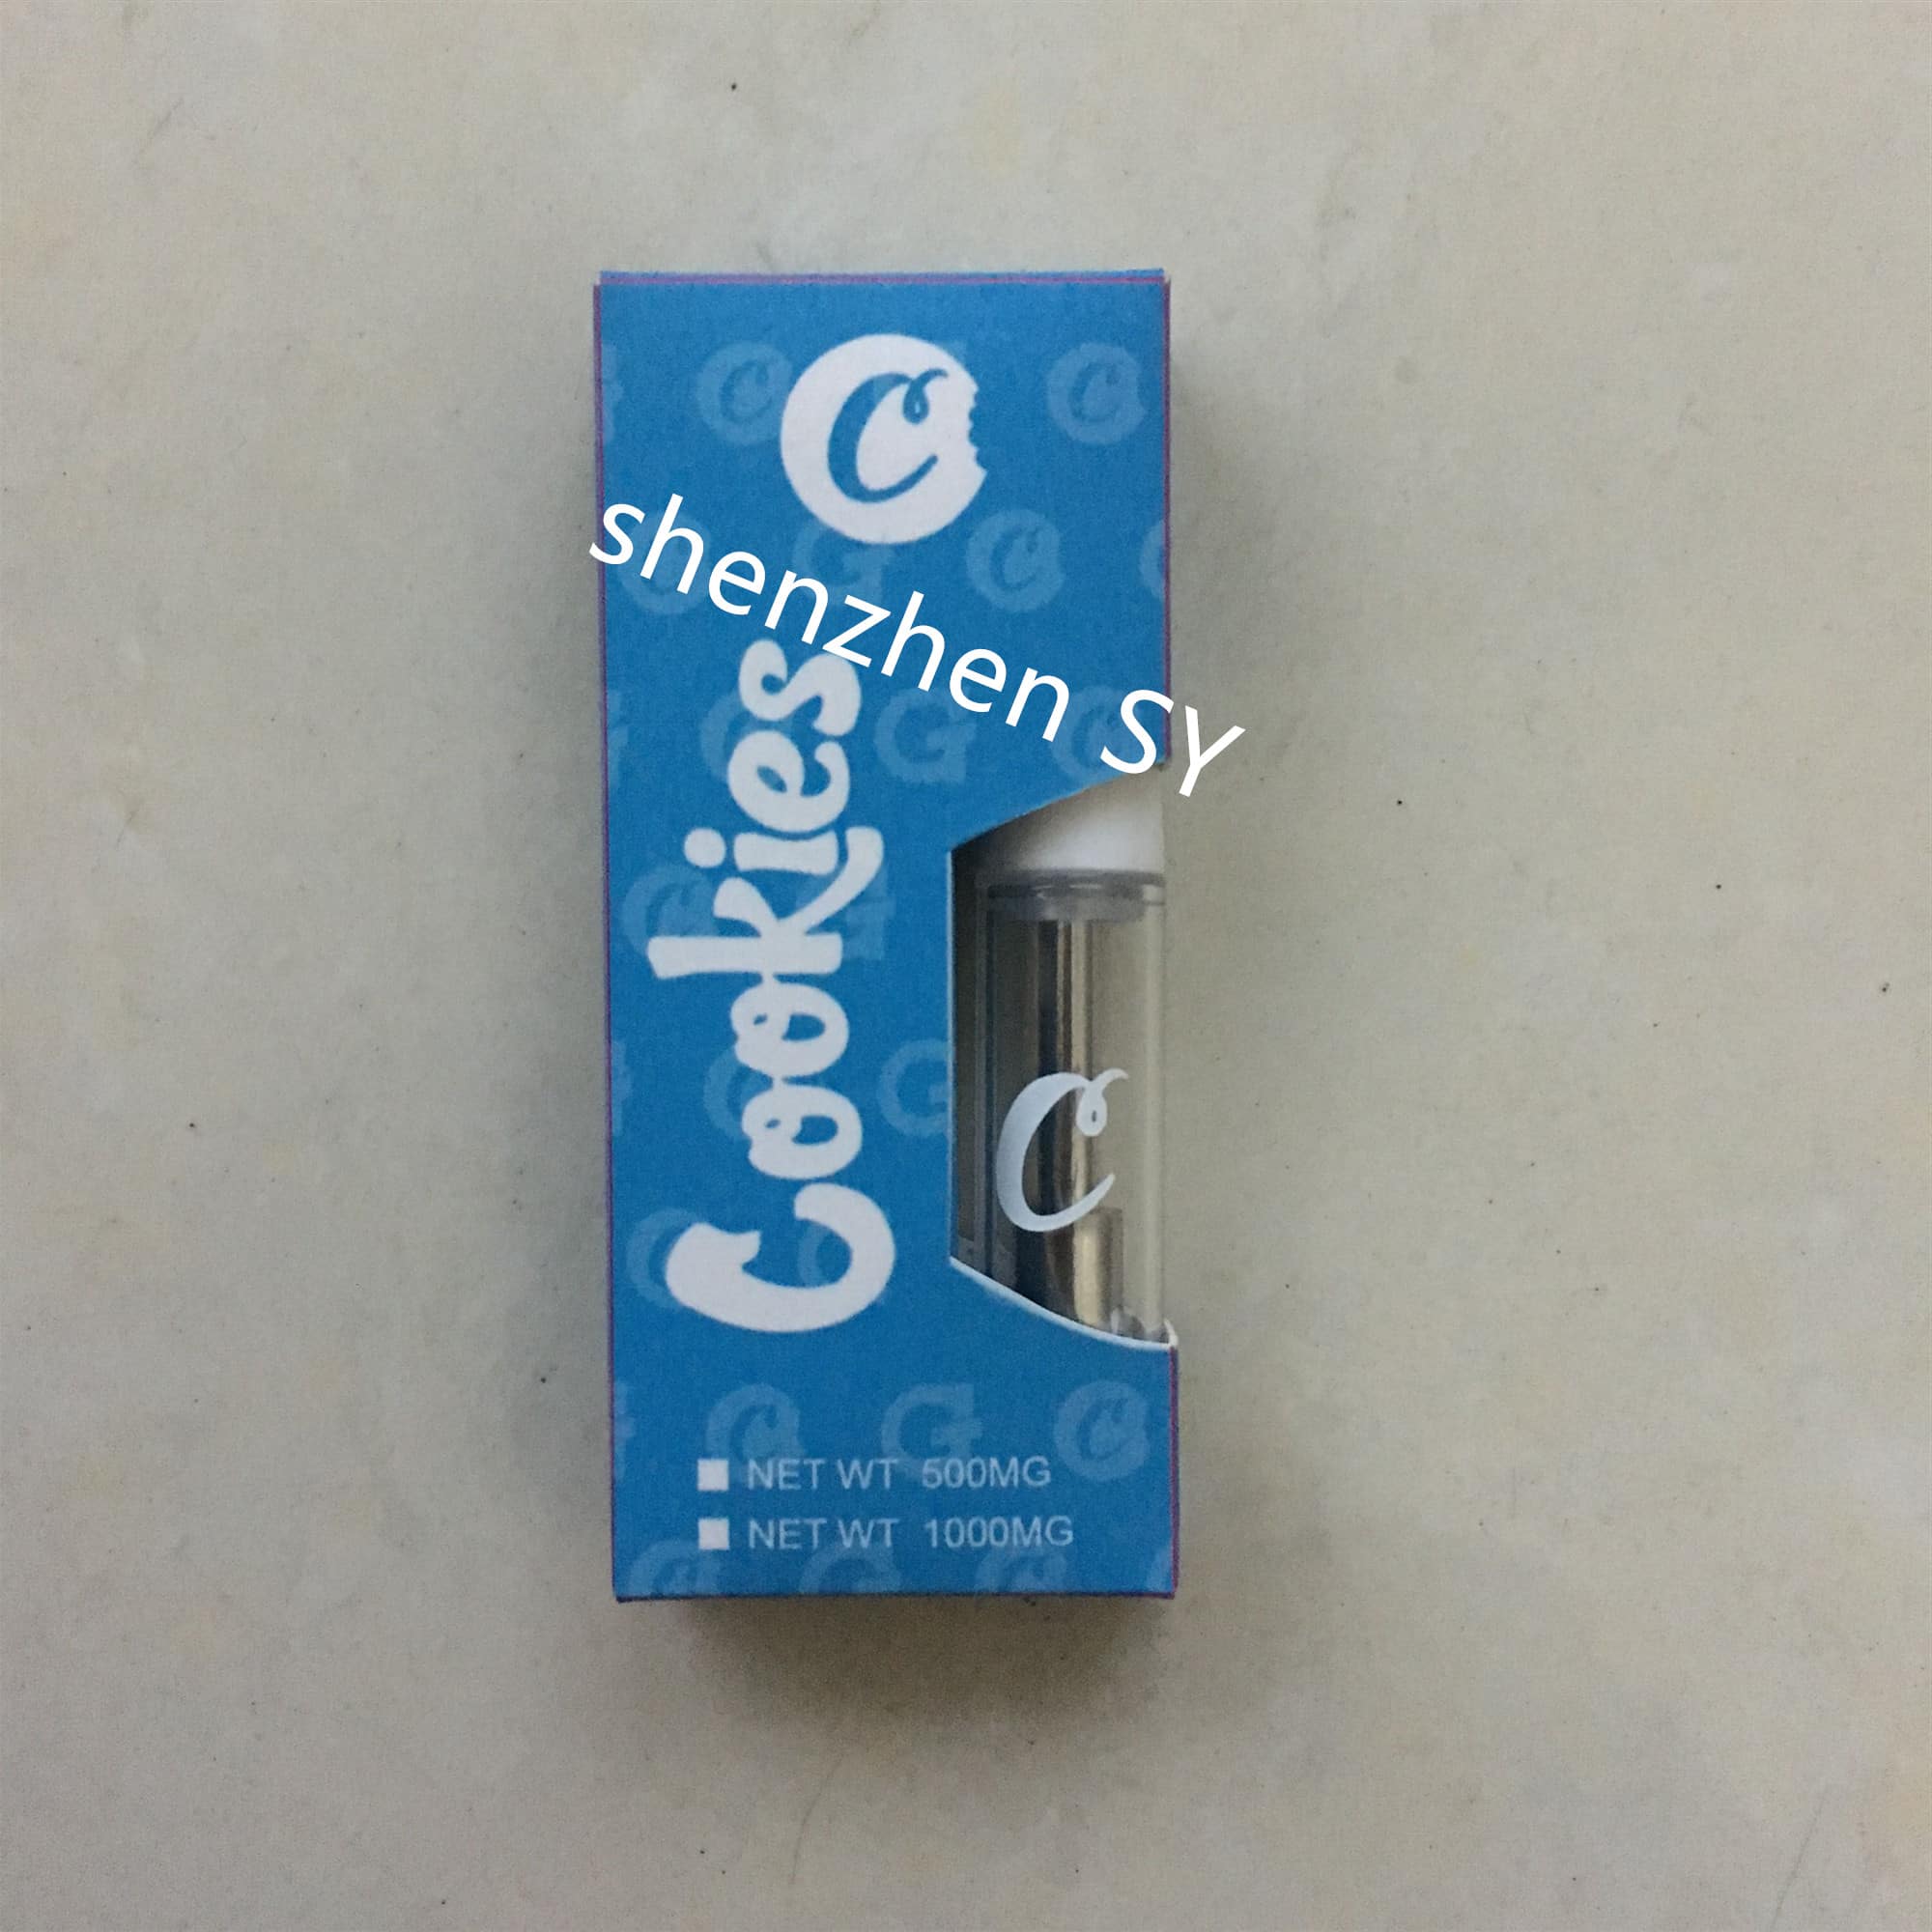 Fake Cookies Cartridge: How to Spot a Counterfeit One